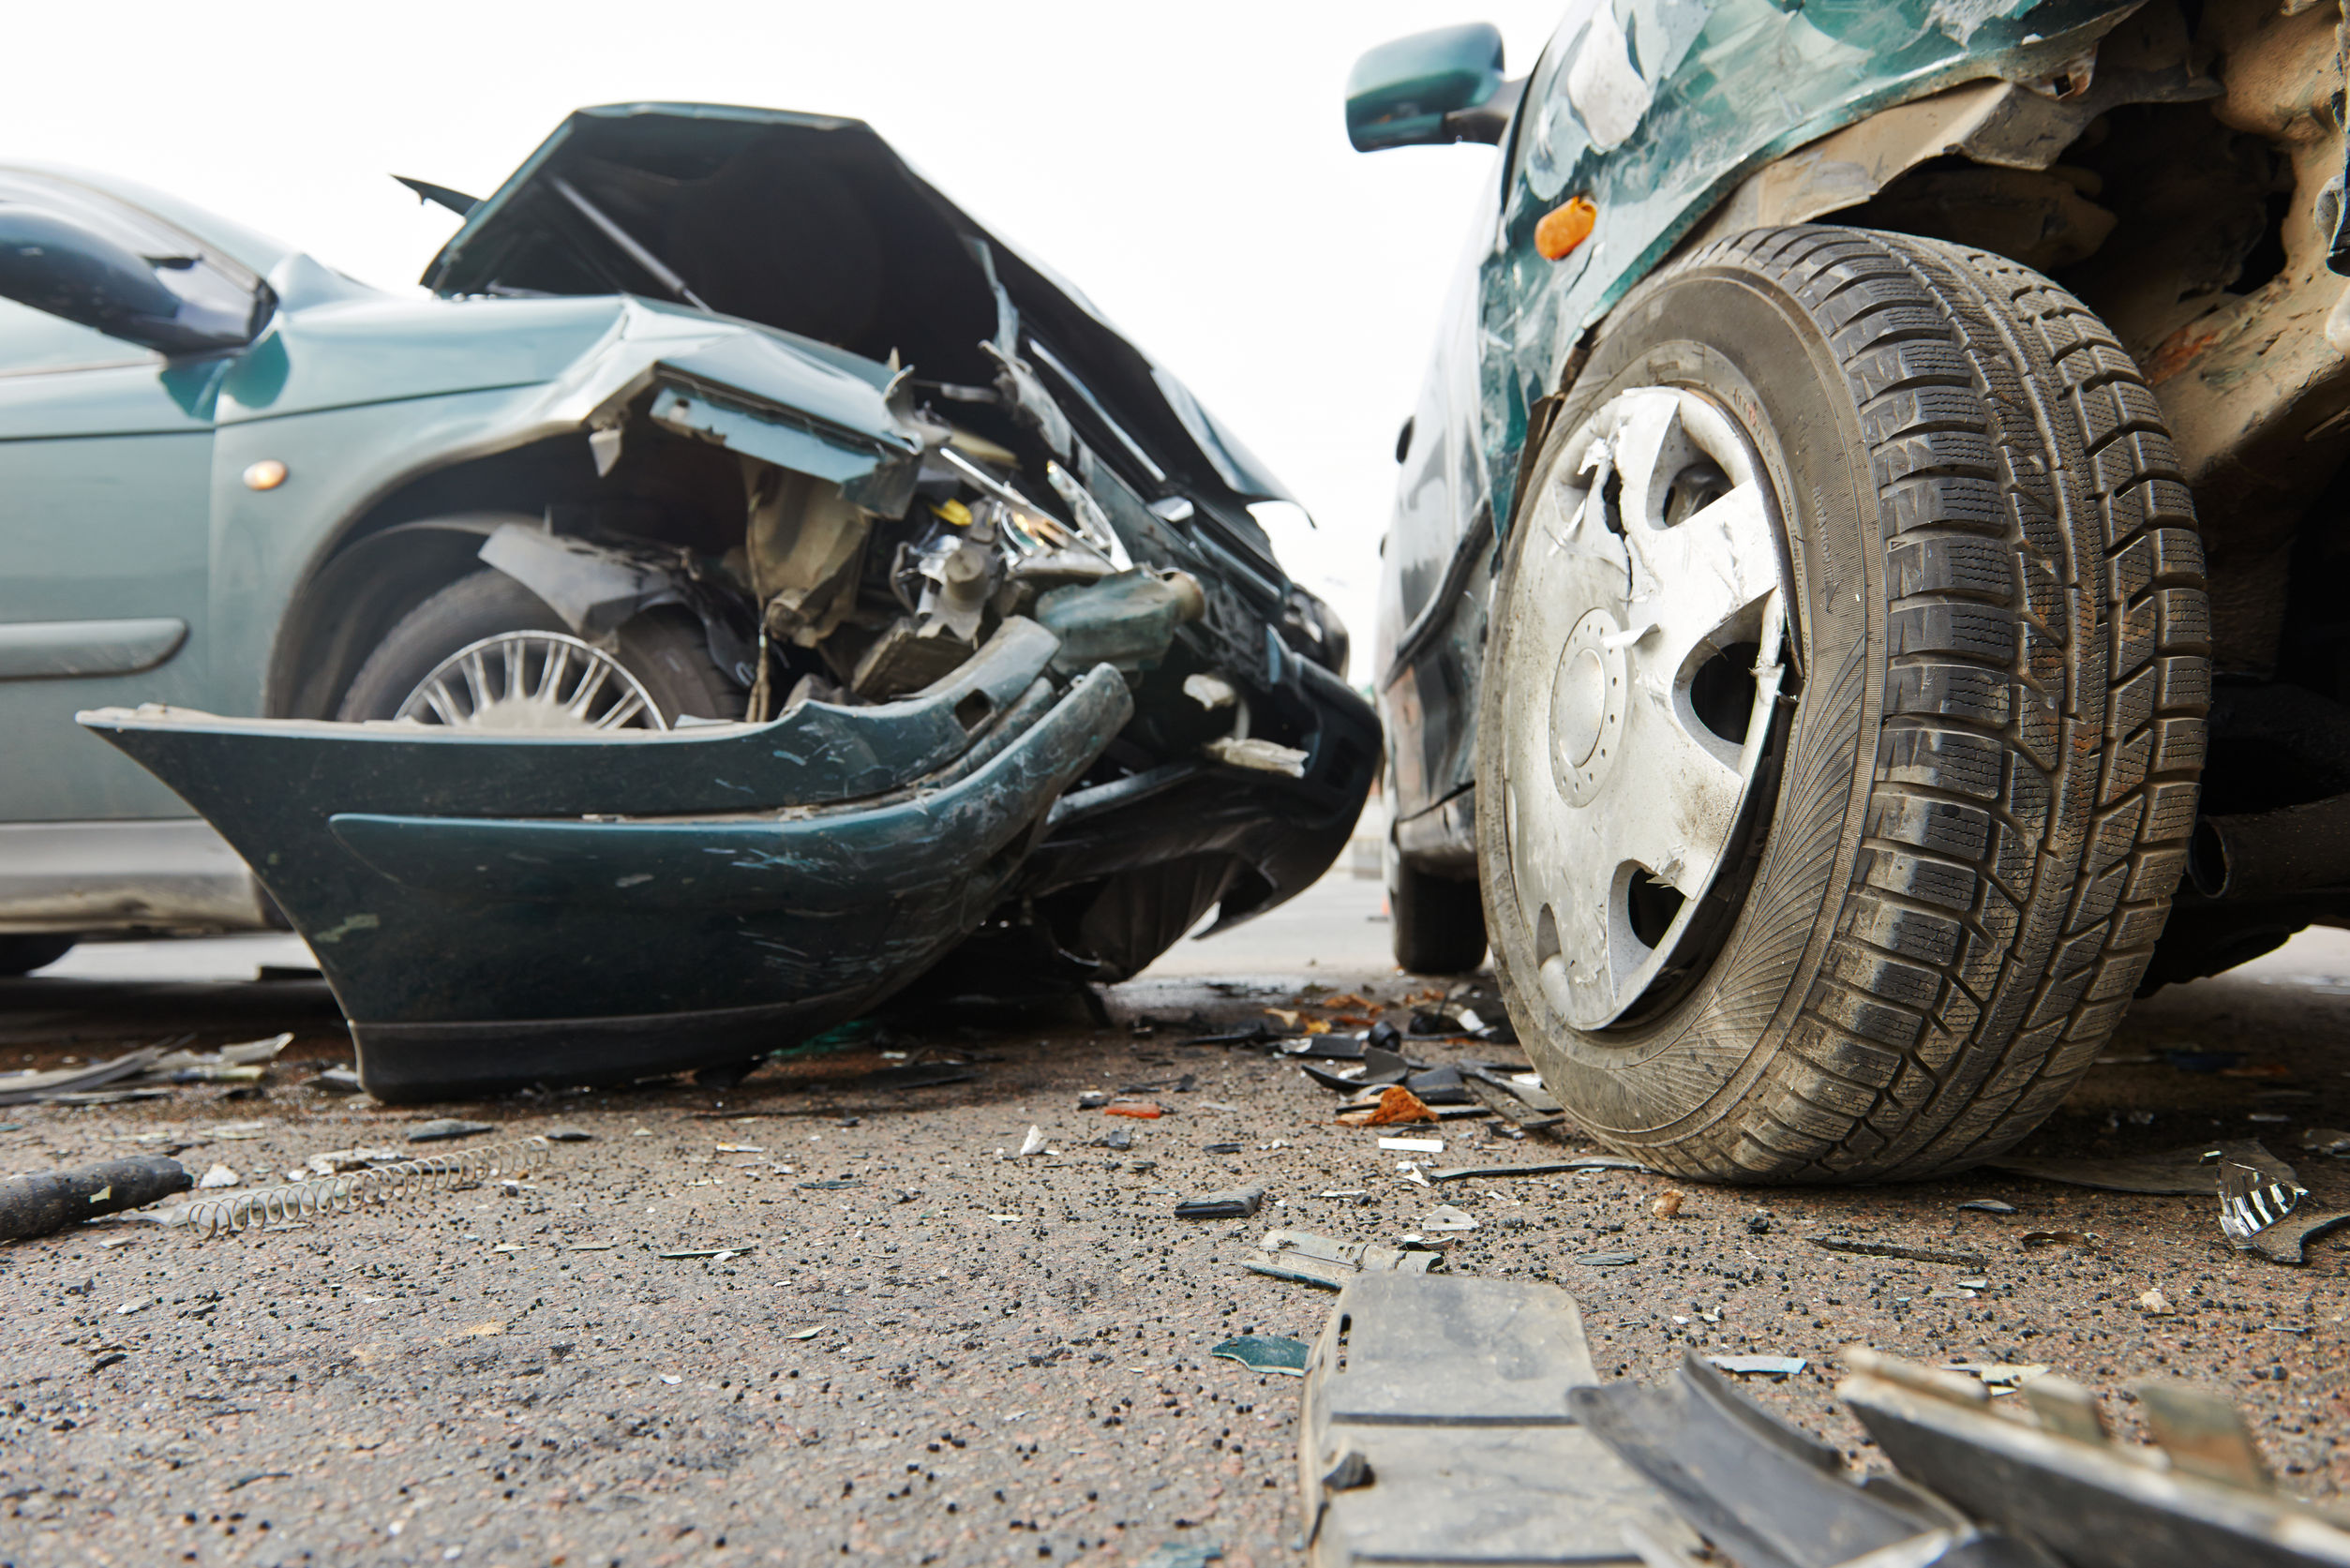 Tampa Crash Kills 3 – What Caused It? 2 Auto Accidents South Florida Injury Law Firm